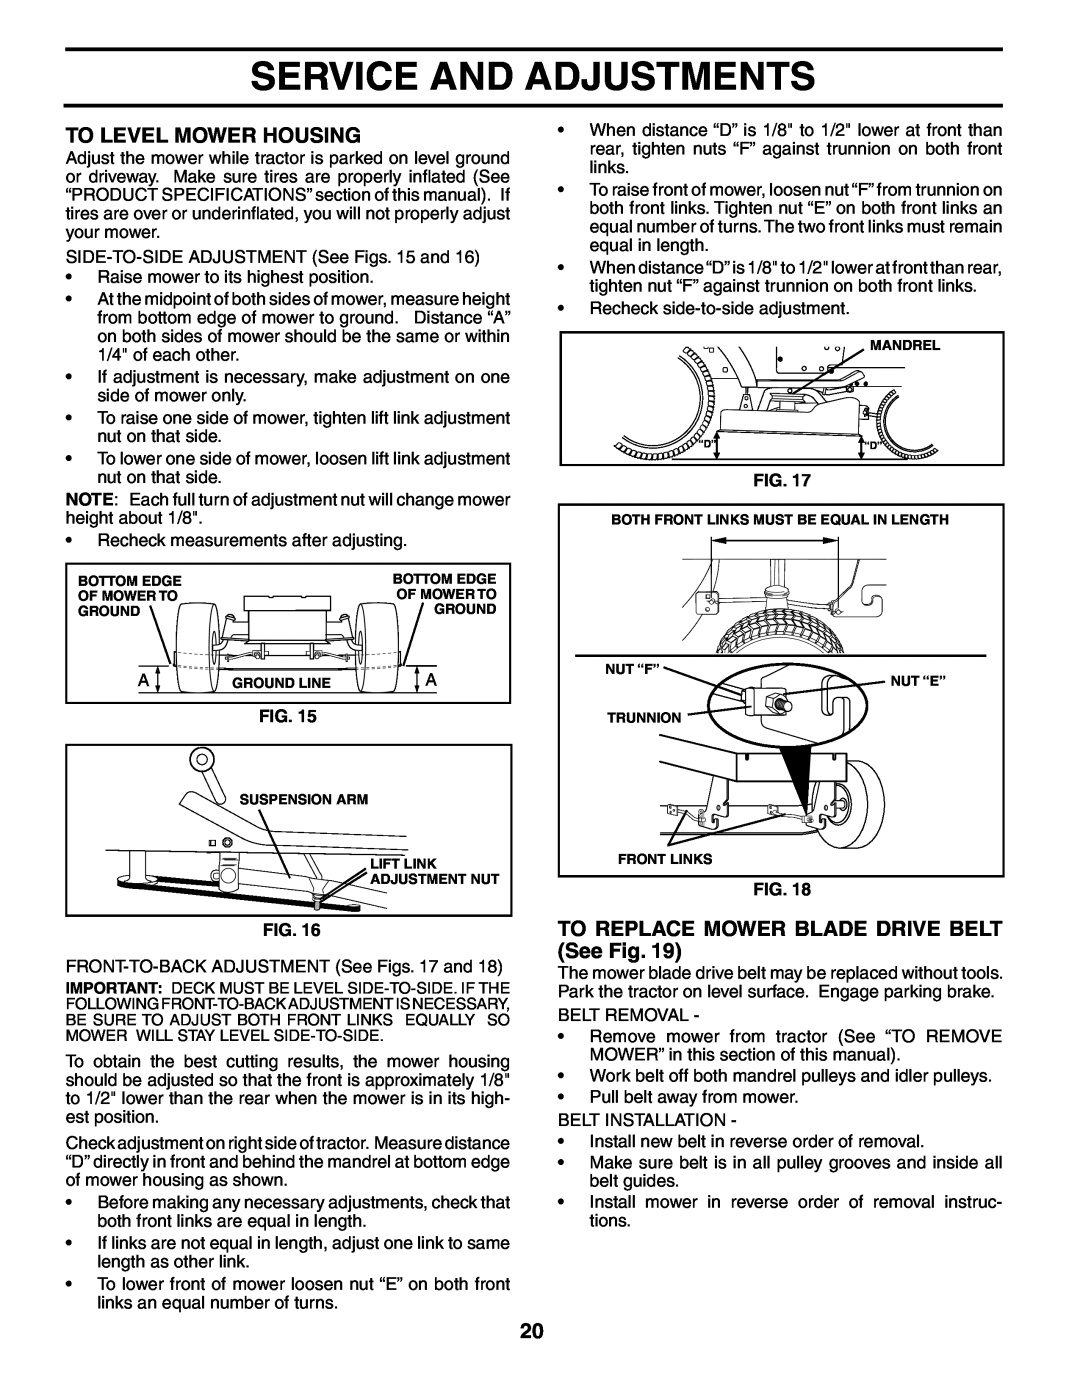 Poulan 96012004600, 401115 manual To Level Mower Housing, TO REPLACE MOWER BLADE DRIVE BELT See Fig, Service And Adjustments 